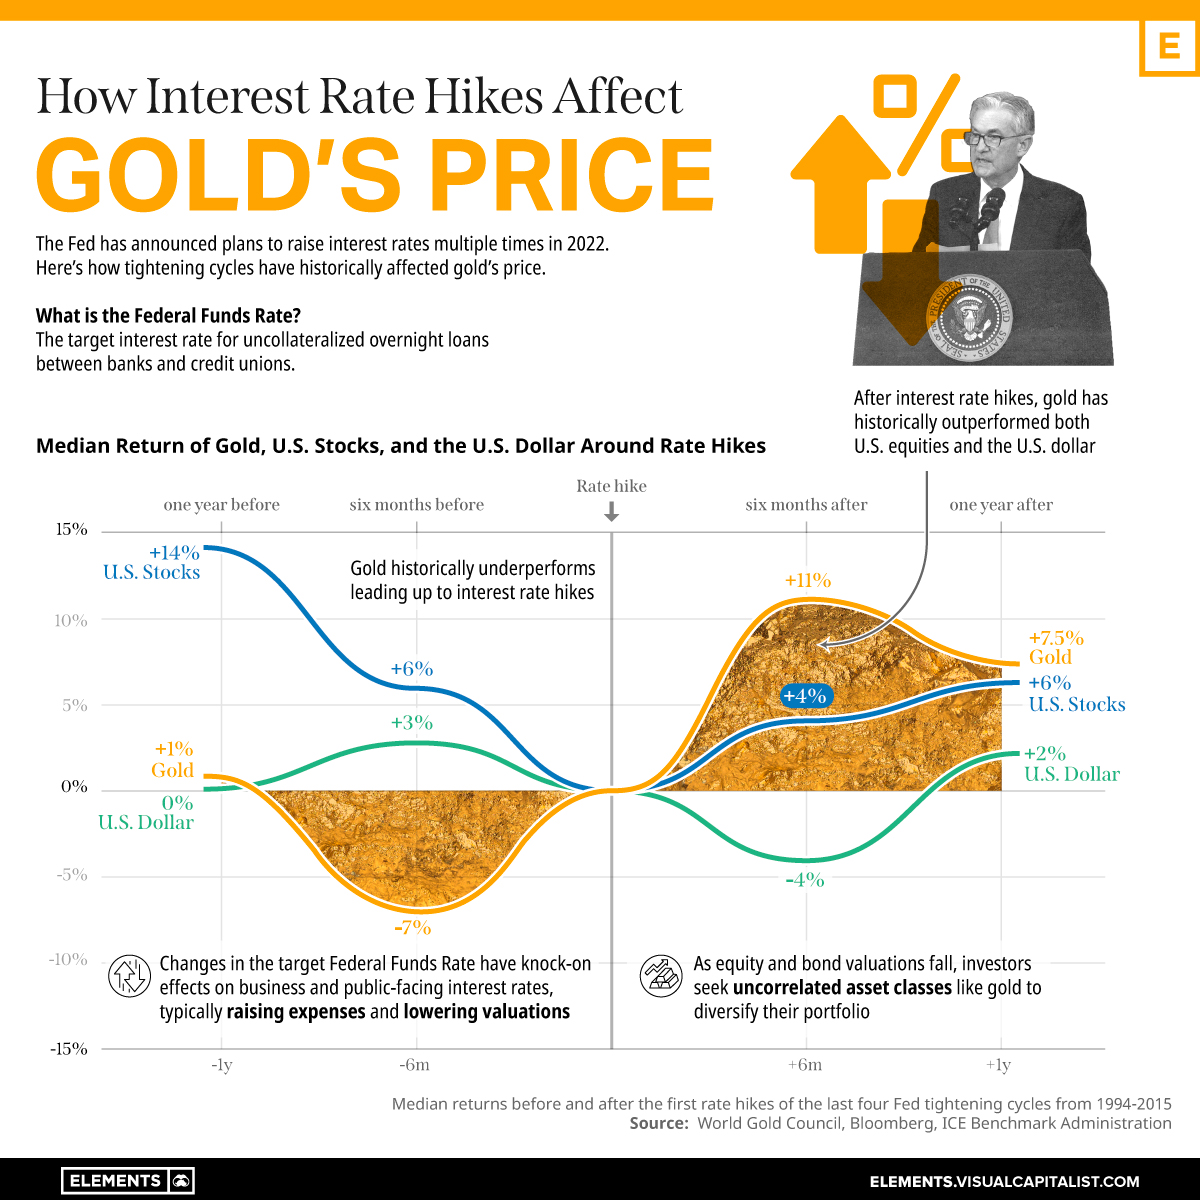 Interest Rate Effect on Gold Price